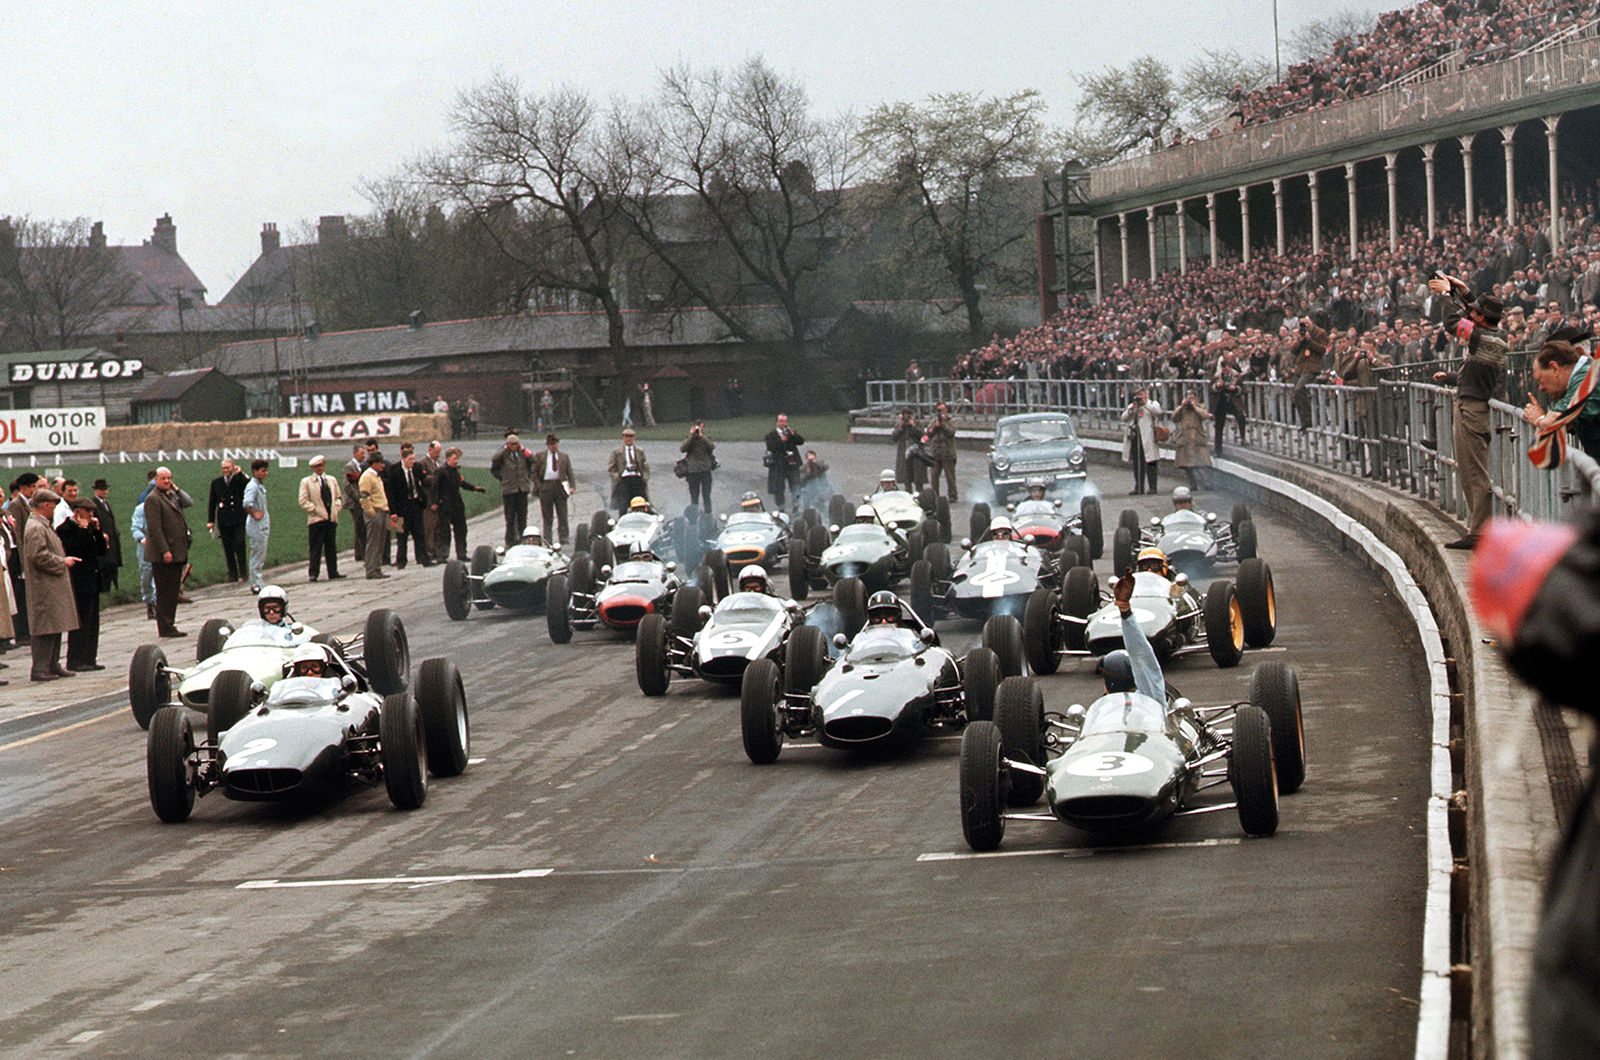 At Aintree on 27 April 1963, Jim Clark raises his hand as his Lotus 25-Climax fails to fire at the start